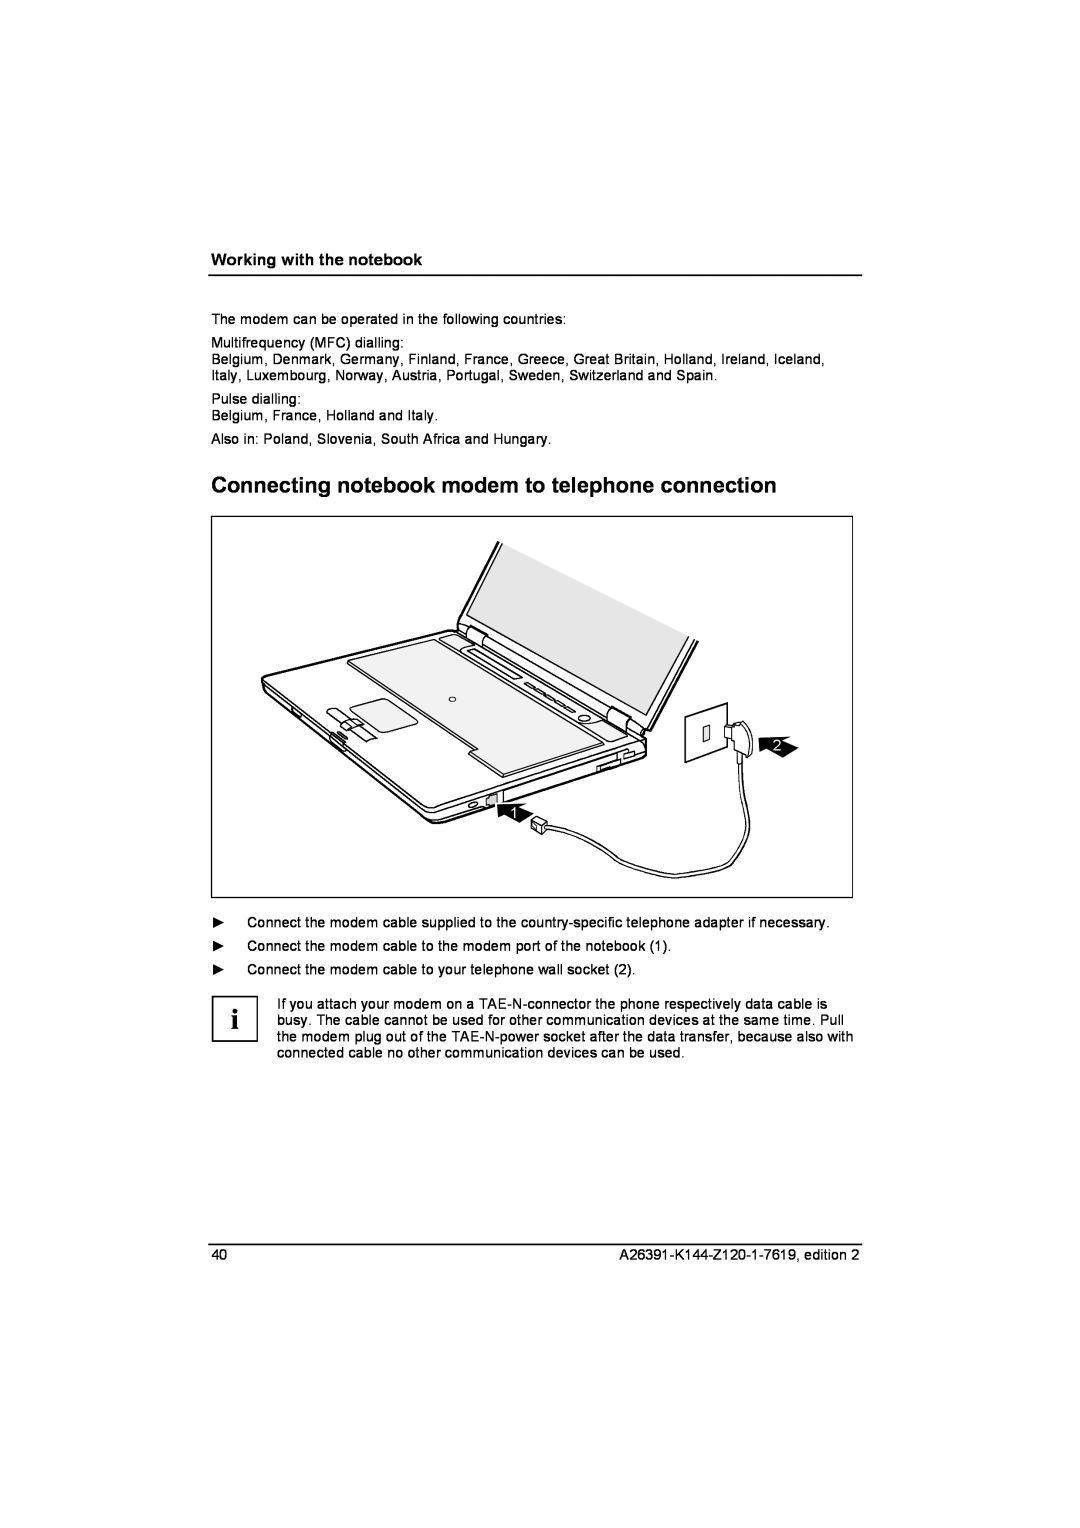 Fujitsu S SERIES manual Connecting notebook modem to telephone connection, Working with the notebook 